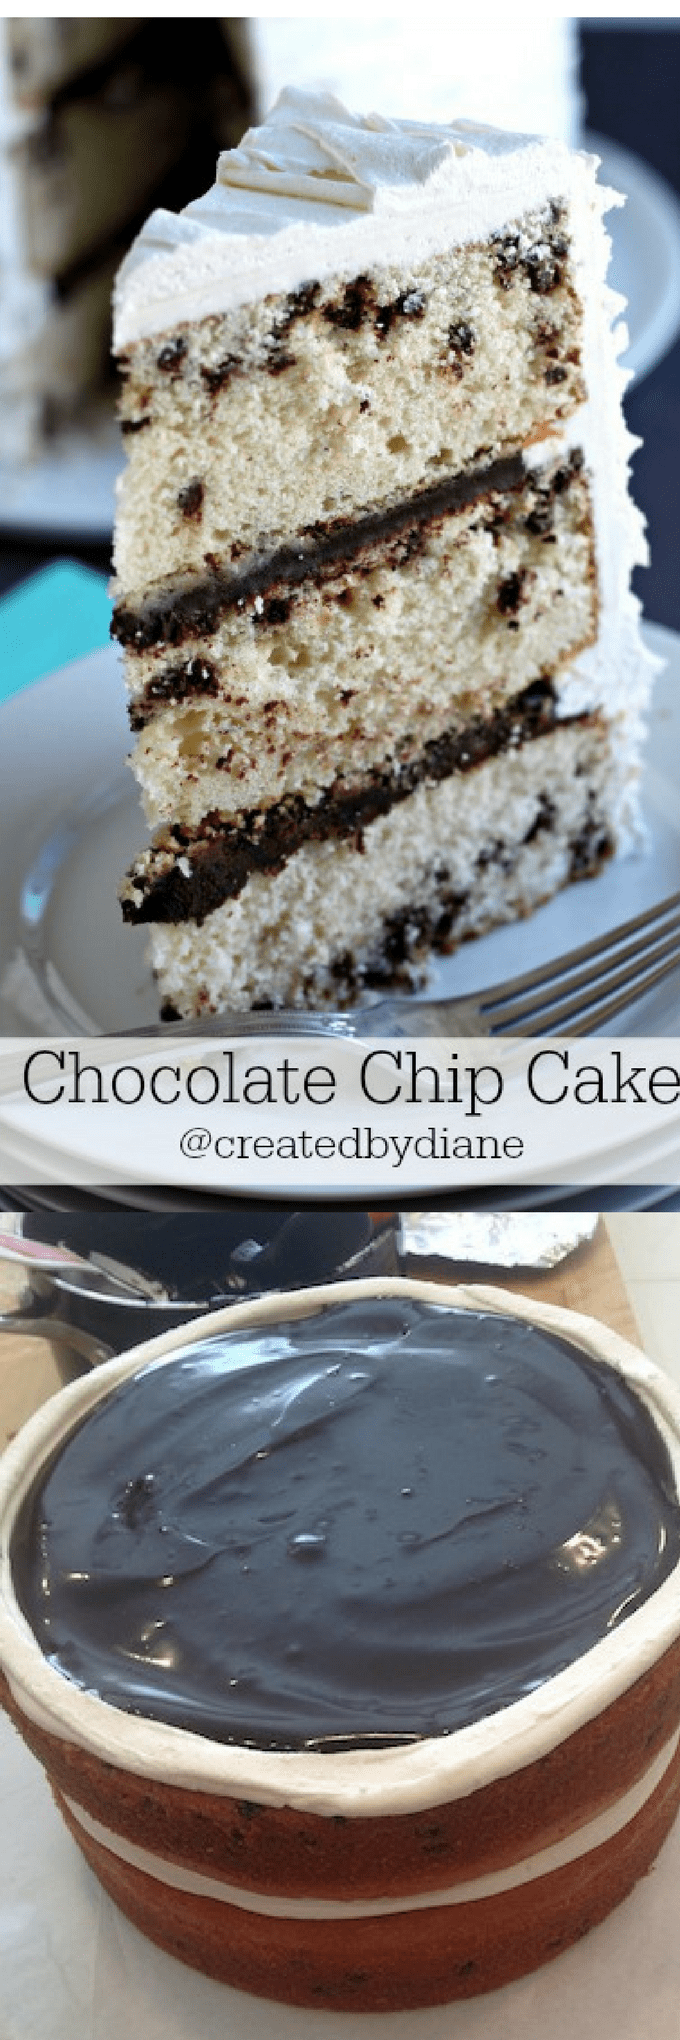 chocolate chip cake with fudge in the layers , the perfect cake for every occasion @createdbydiane